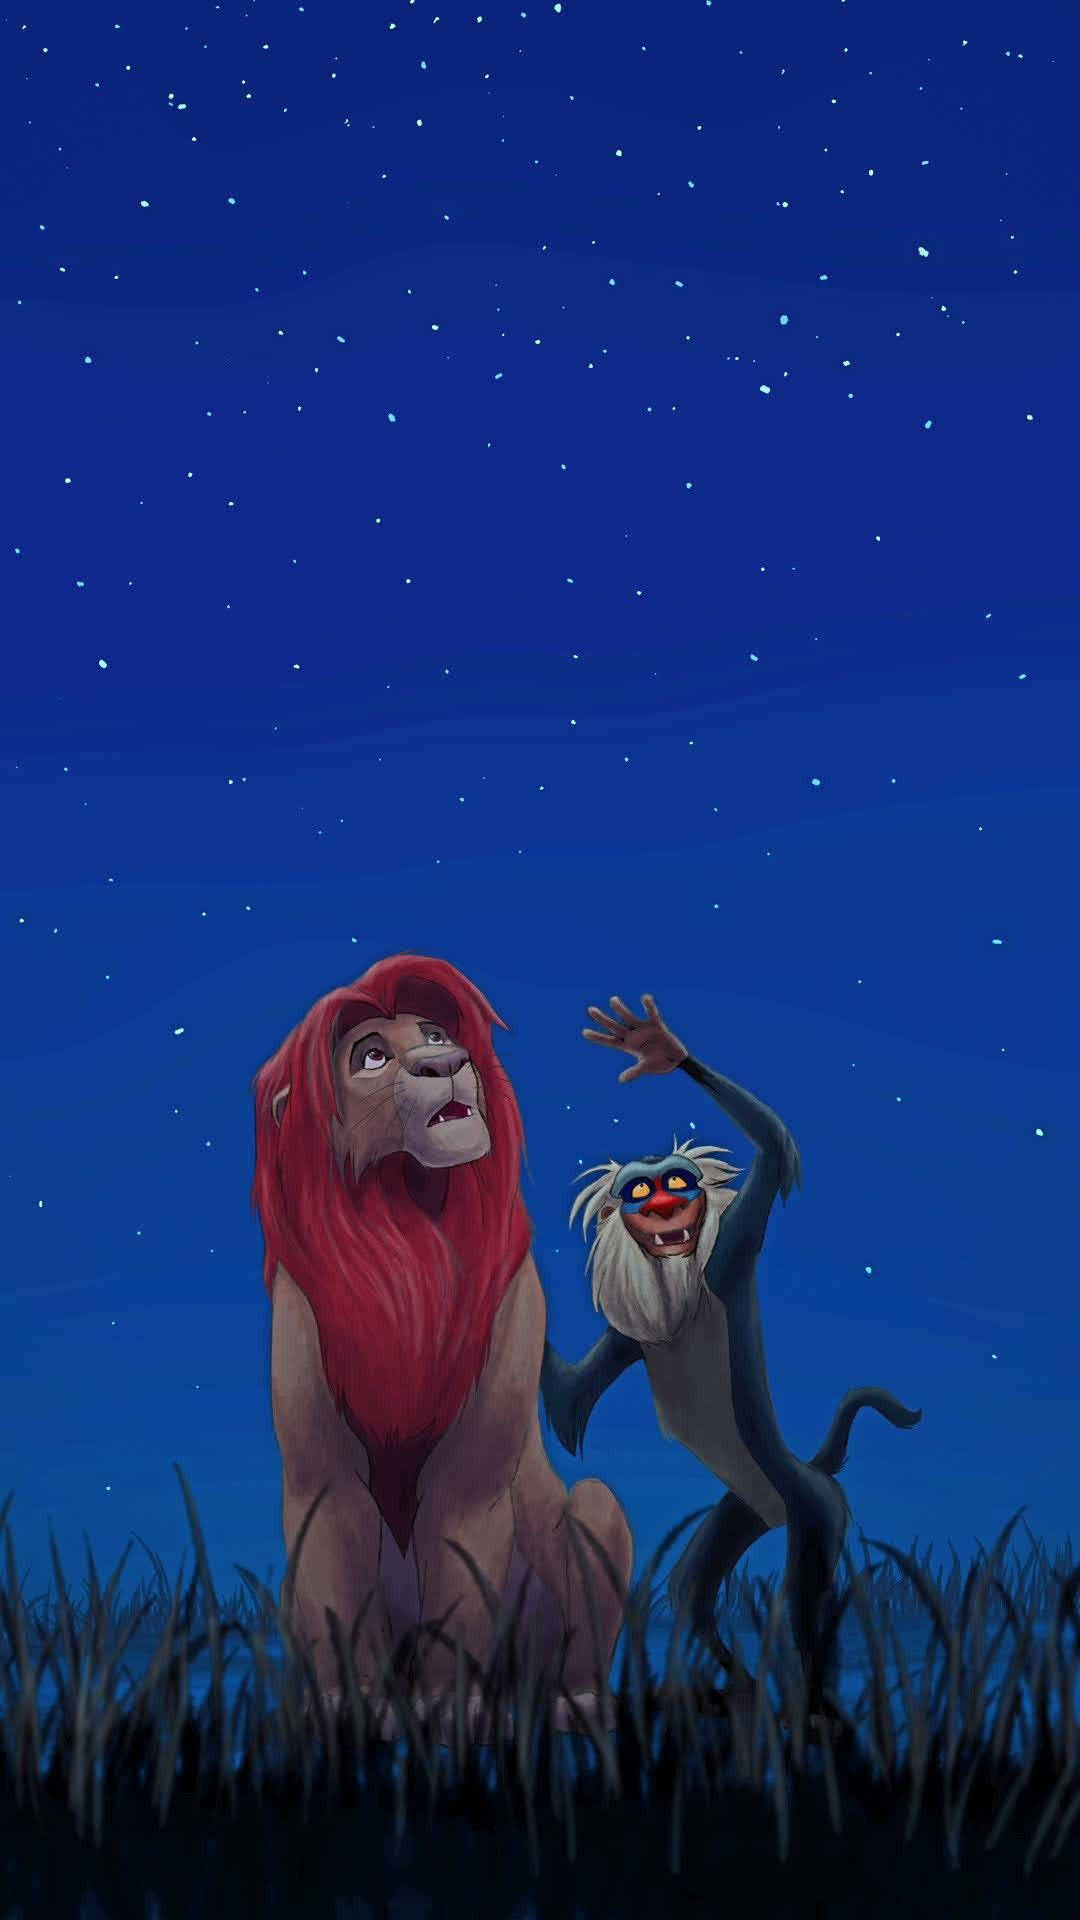 Simba the lion king gazing at the night sky, remembering the legacy of his father Wallpaper